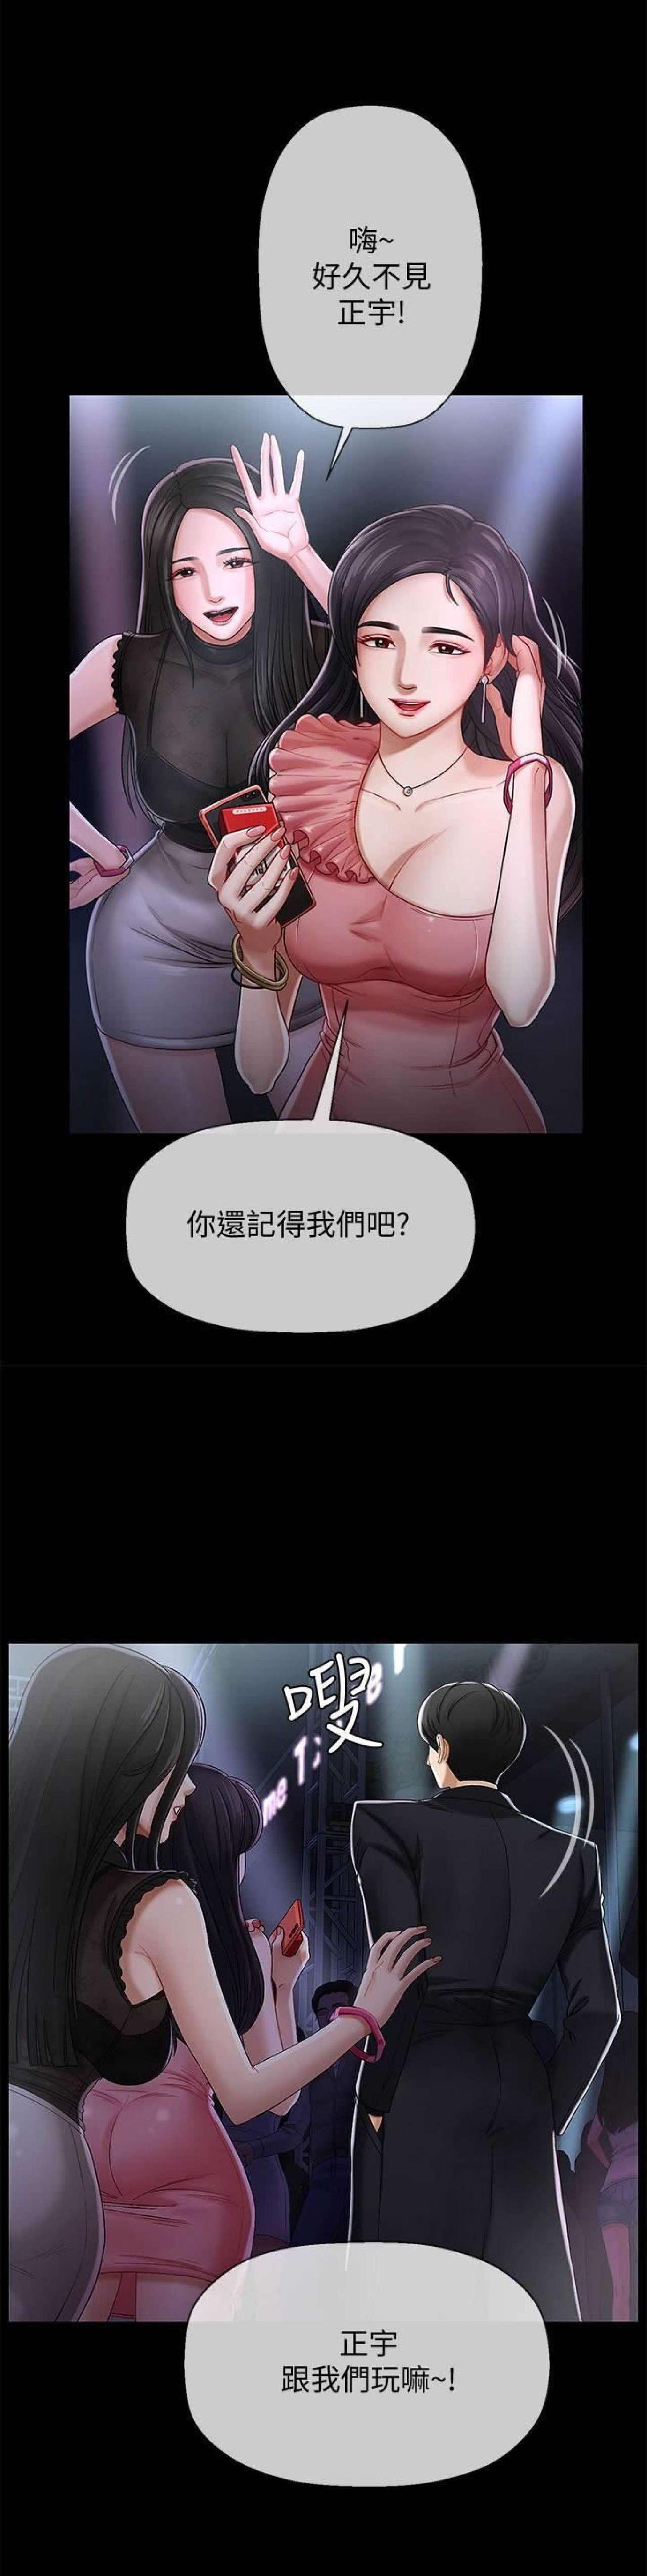 Comedor 坏老师 | PHYSICAL CLASSROOM 2 Prostitute - Page 2